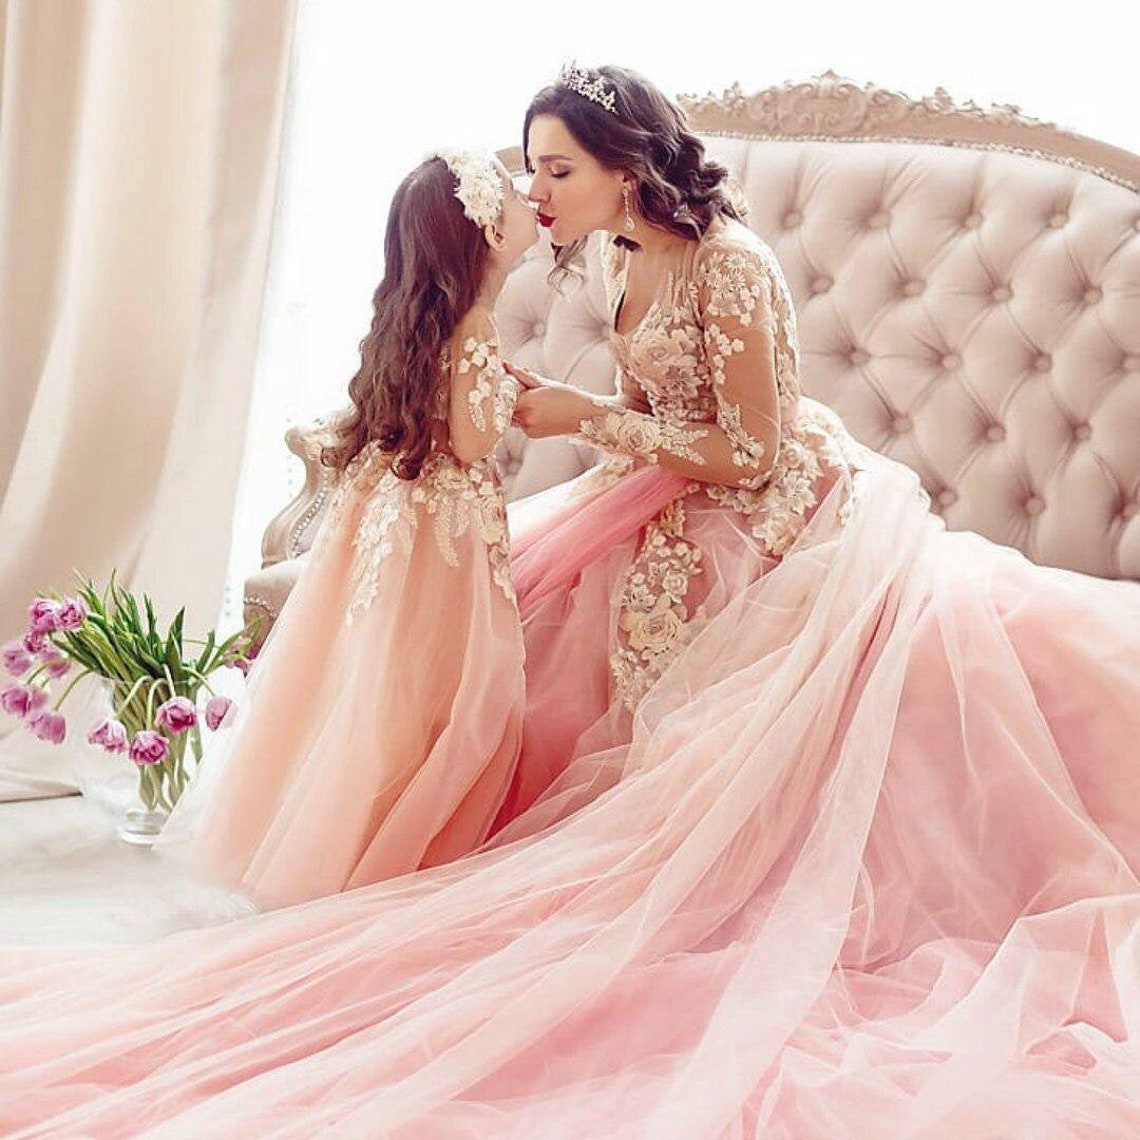 Photo Shoot Mother and Daughter Dresses Blush Matching Dresses | Etsy